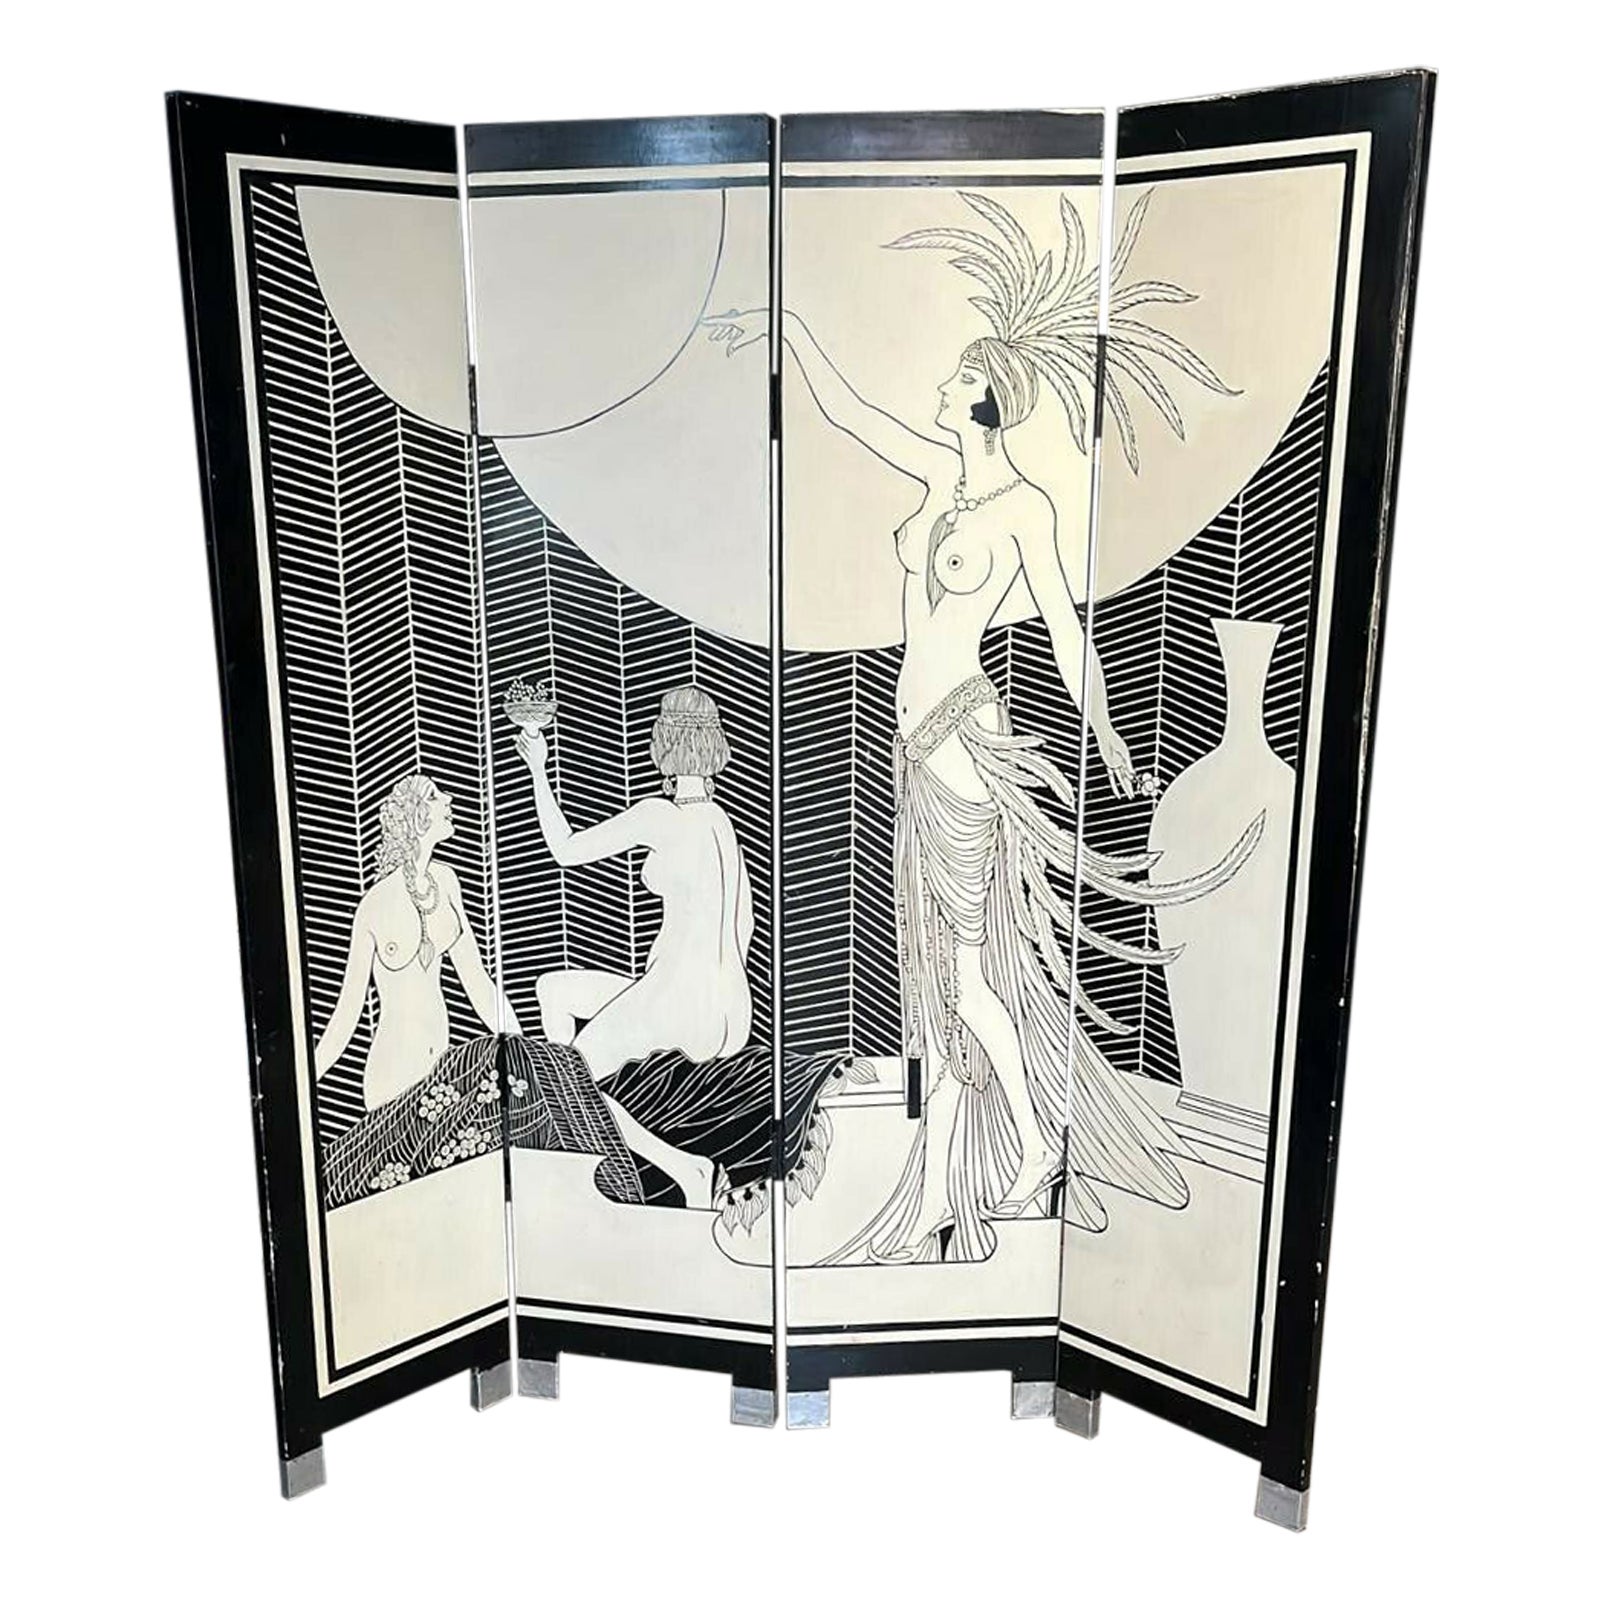 Art Deco Early 20th Century Four Fold Room Screen Divider